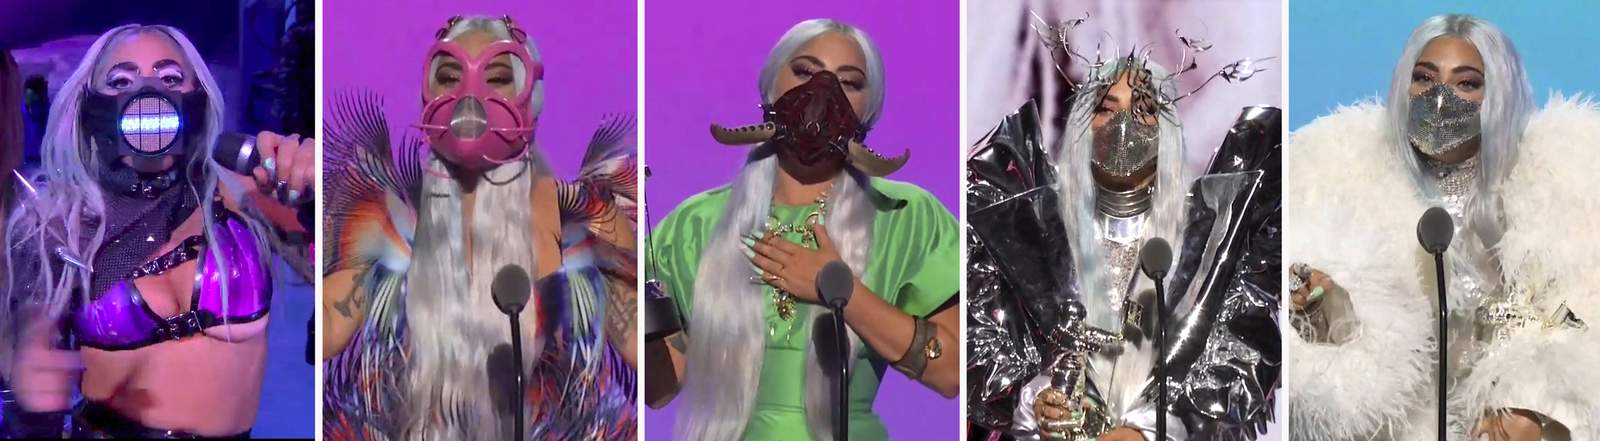 Gagas masks, Weeknds advocacy and more top VMAs moments